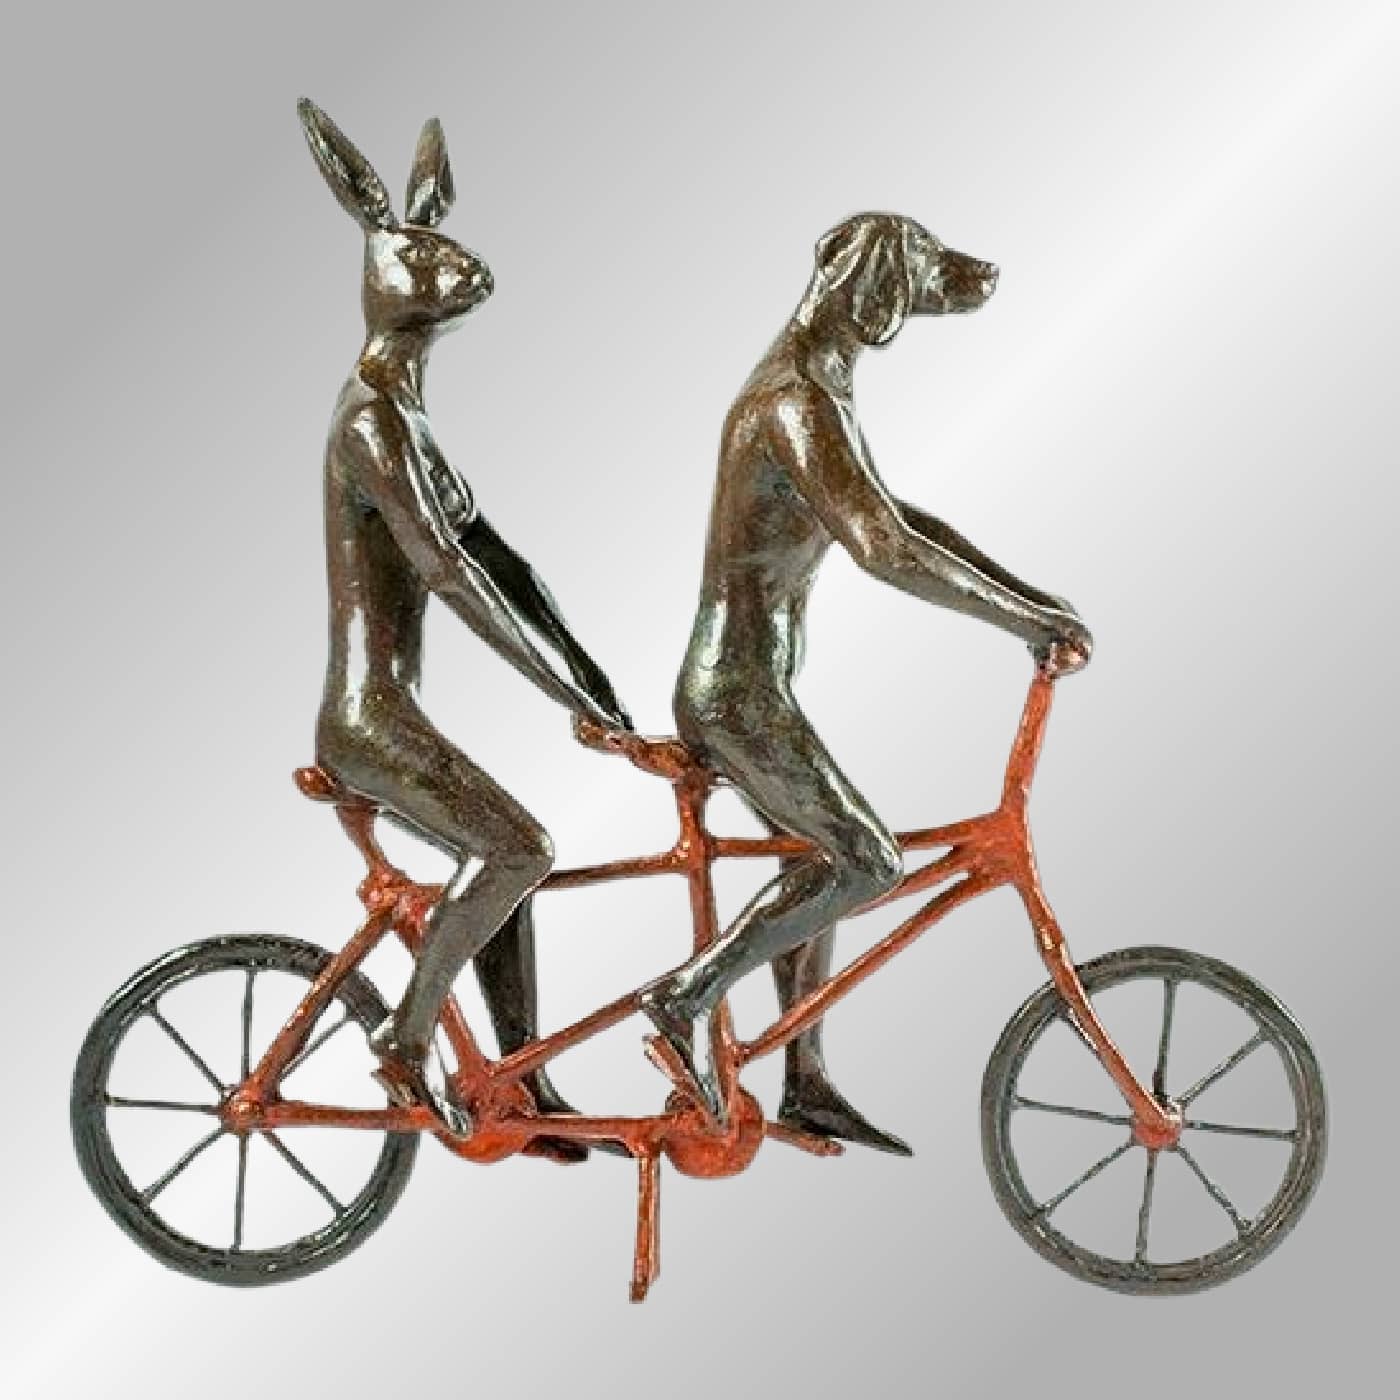 Gillie and Marc Bronze Sculpture ~ 'They Loved Riding Together in Paris' (Red)' - Curate Art & Design Gallery Sorrento Mornington Peninsula Melbourne